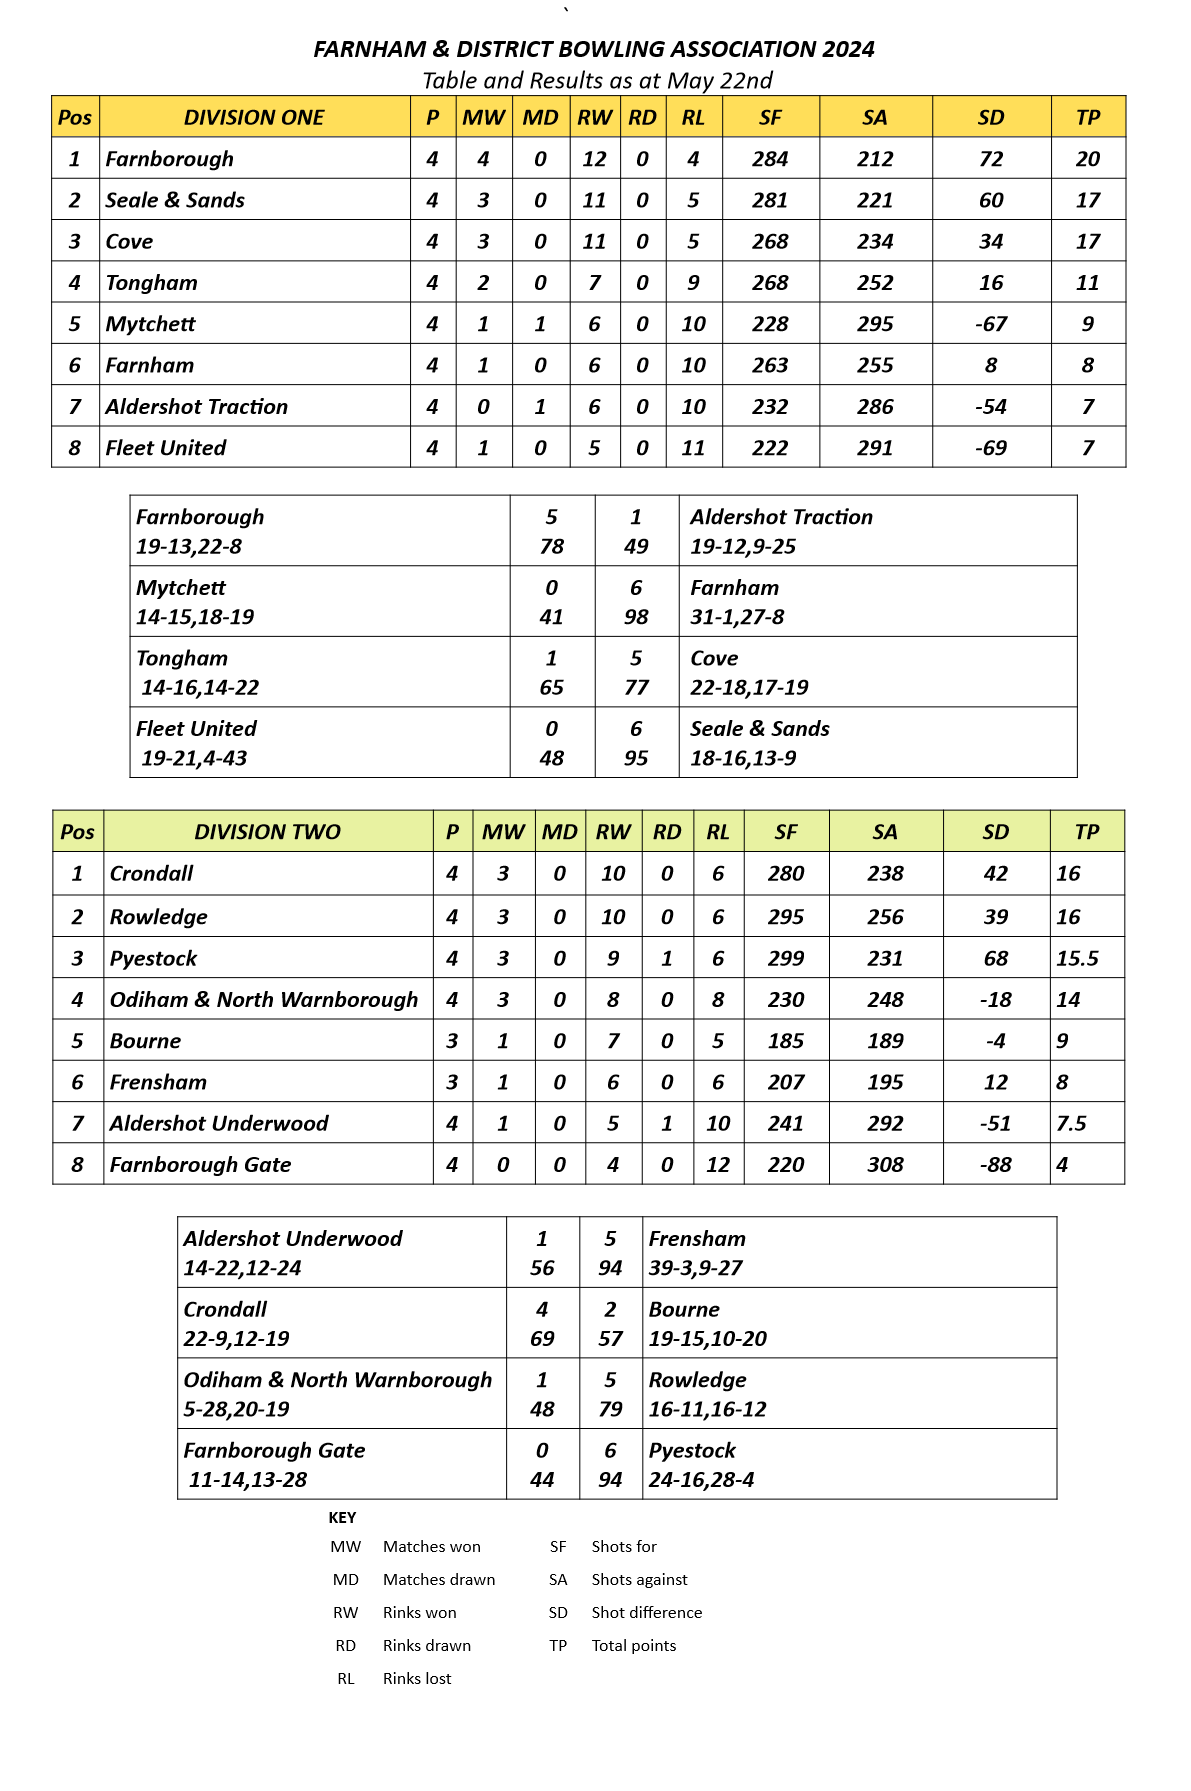  Farnham&District Bowling Association  Tables & Results as at May 22nd